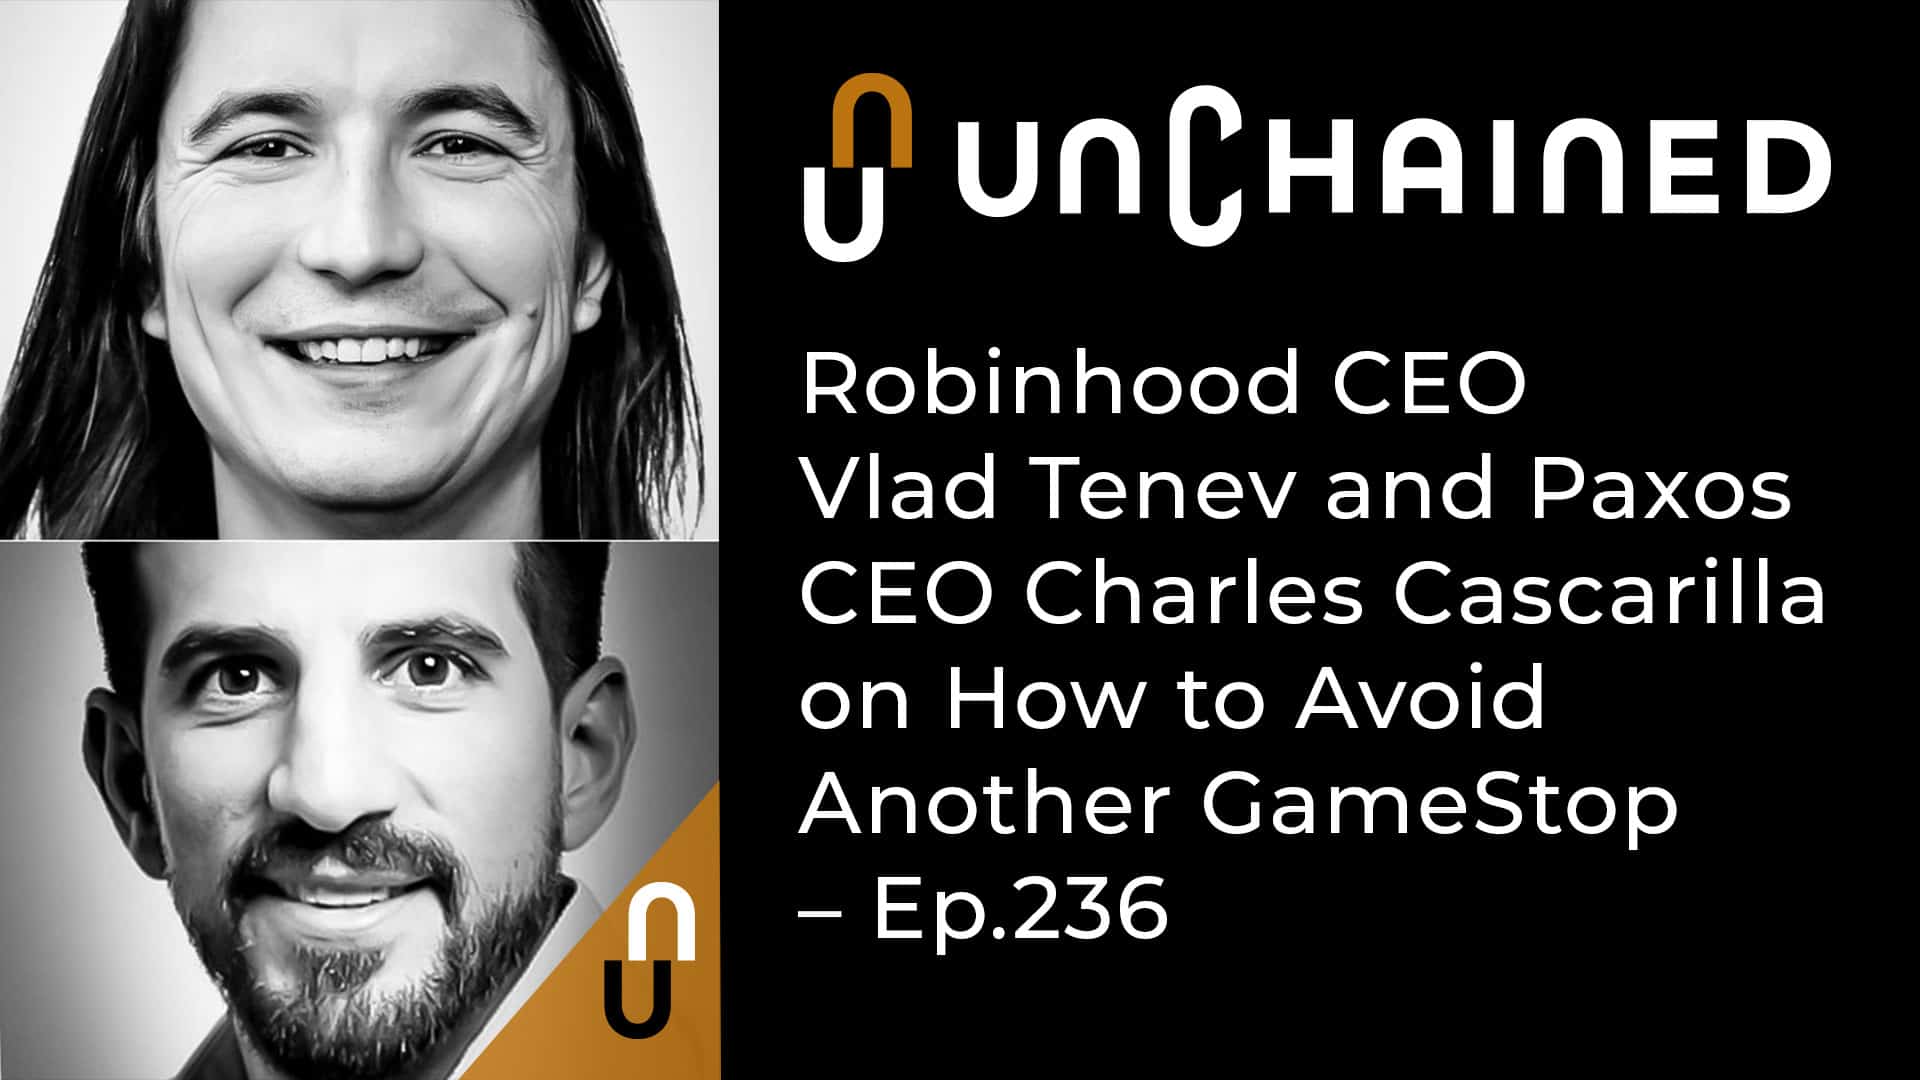 Unchained - Ep.236 - Robinhood CEO Vlad Tenev and Paxos CEO Charles Cascarilla on How to Avoid Another GameStop